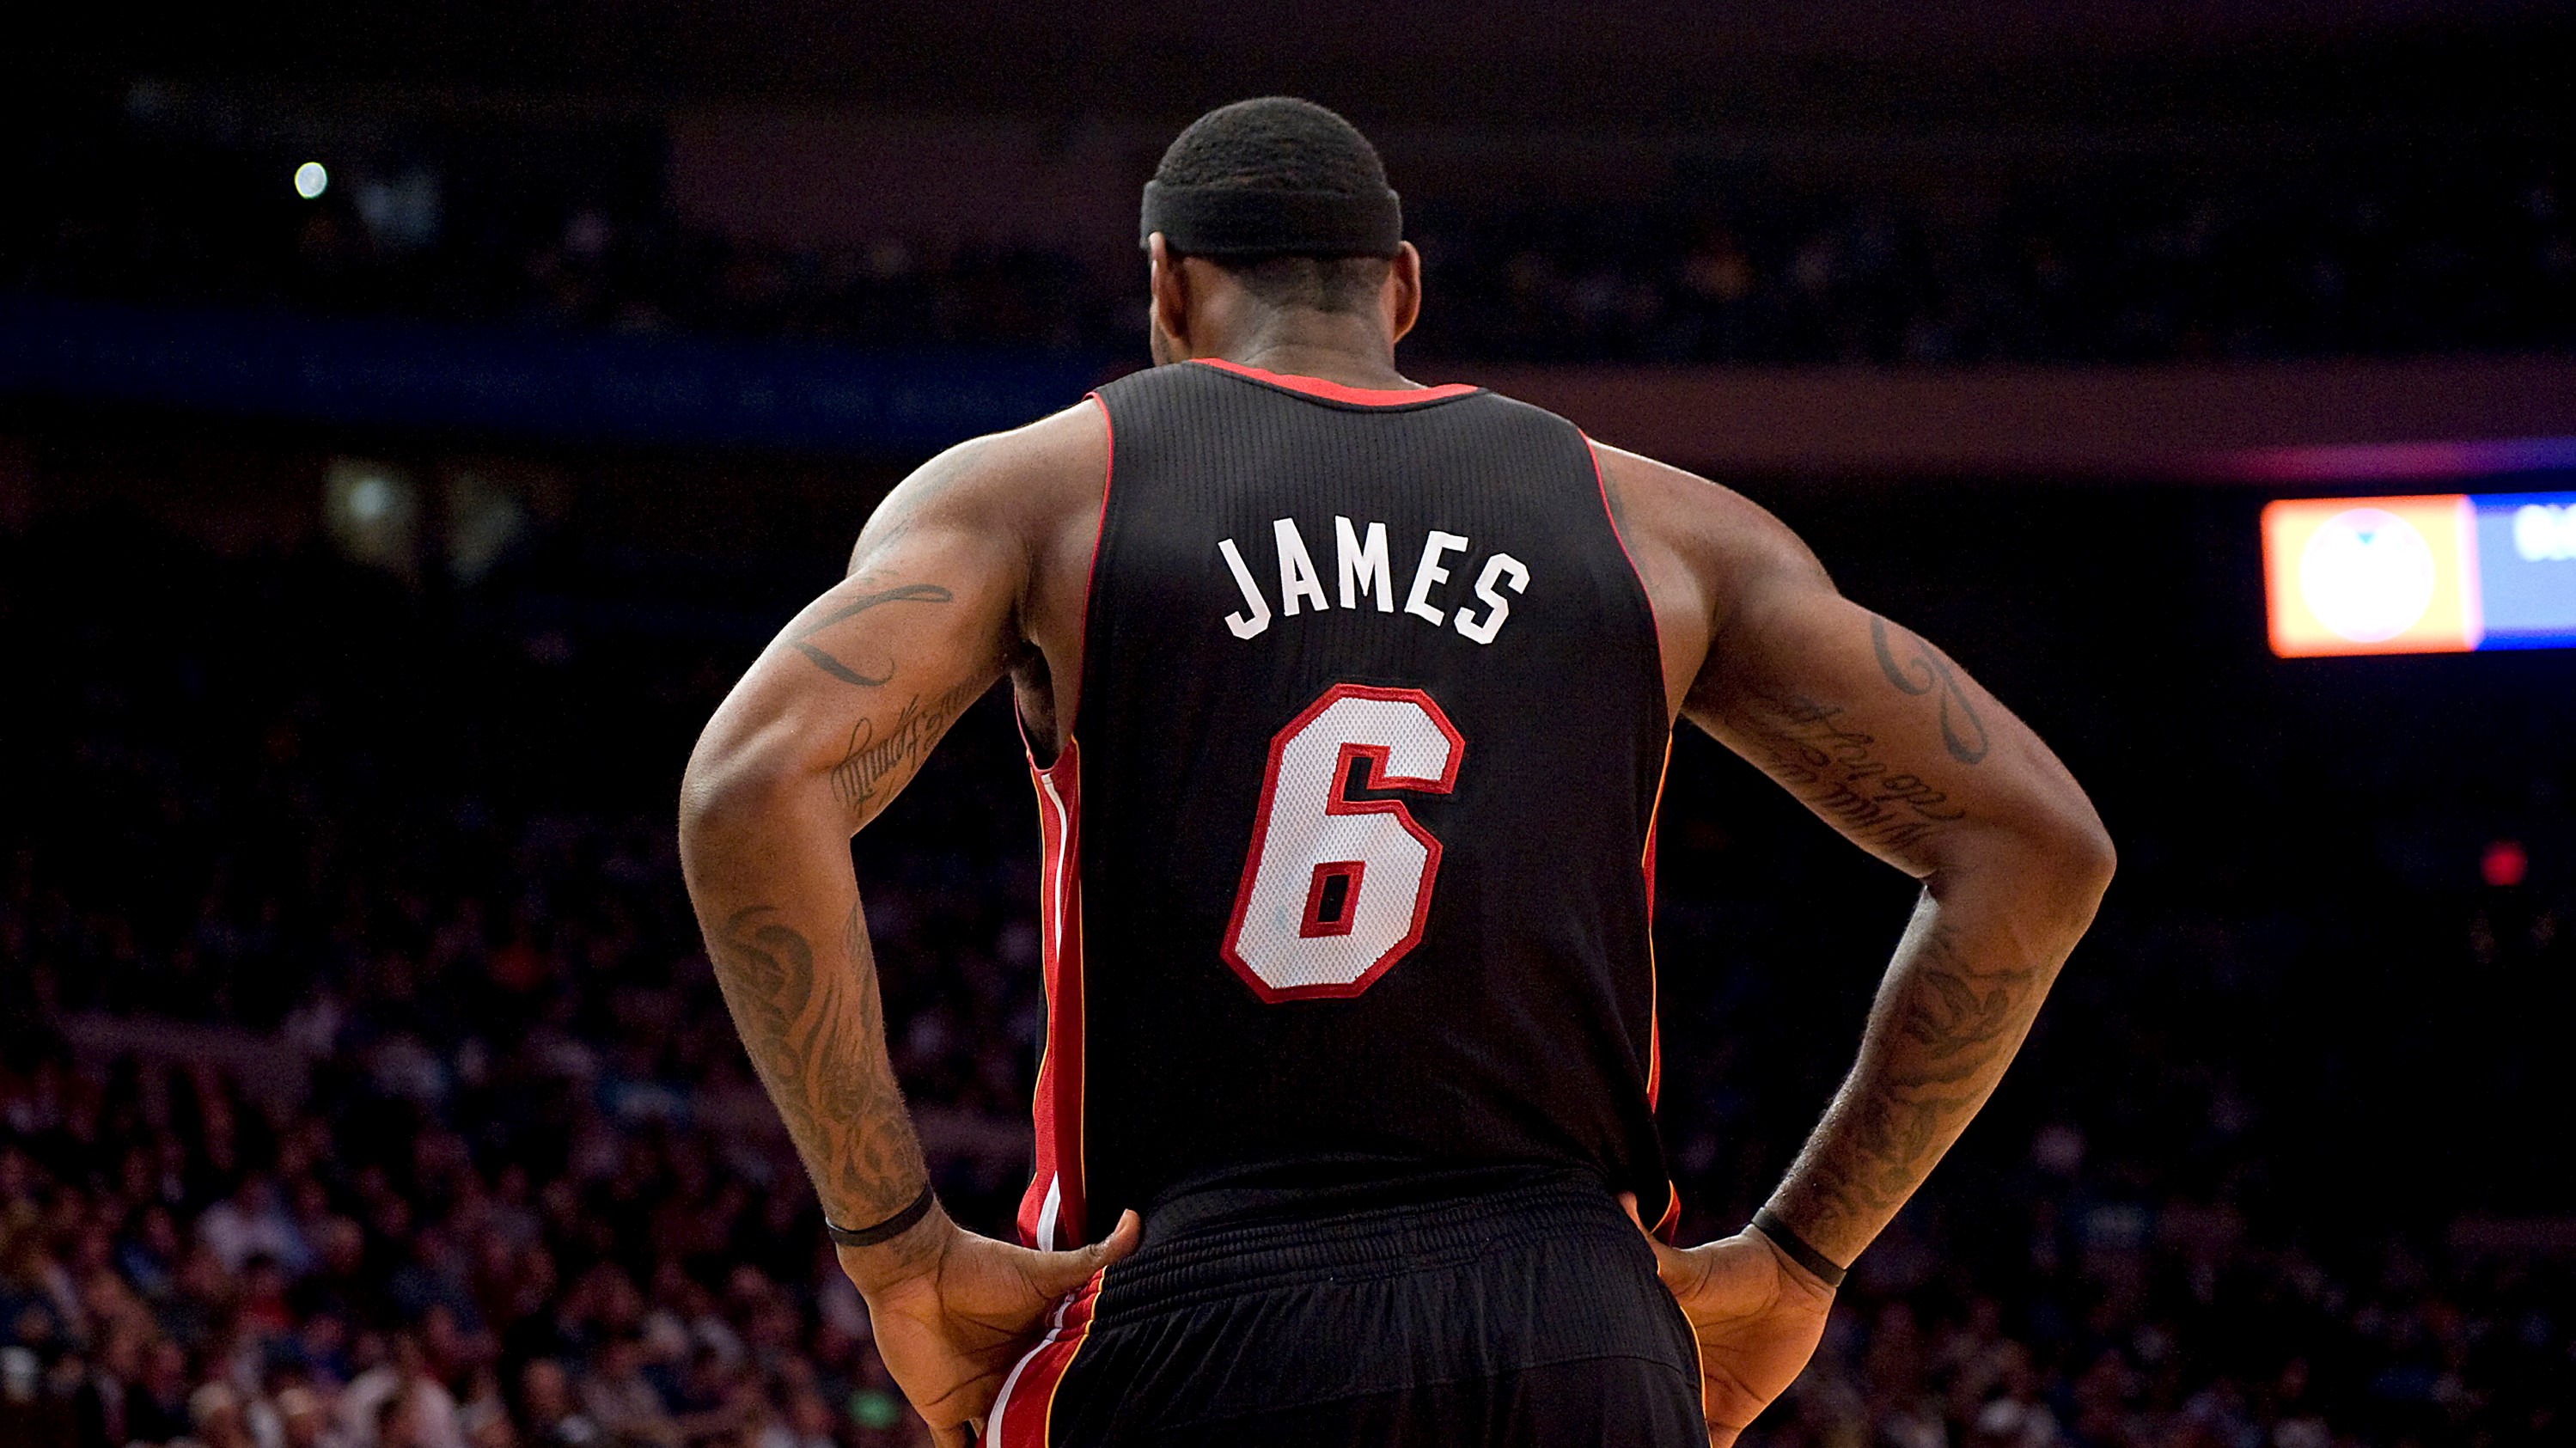 LeBron James Miami Heat NBA Finals jersey headed to auction, expected to  fetch up to $5 million 